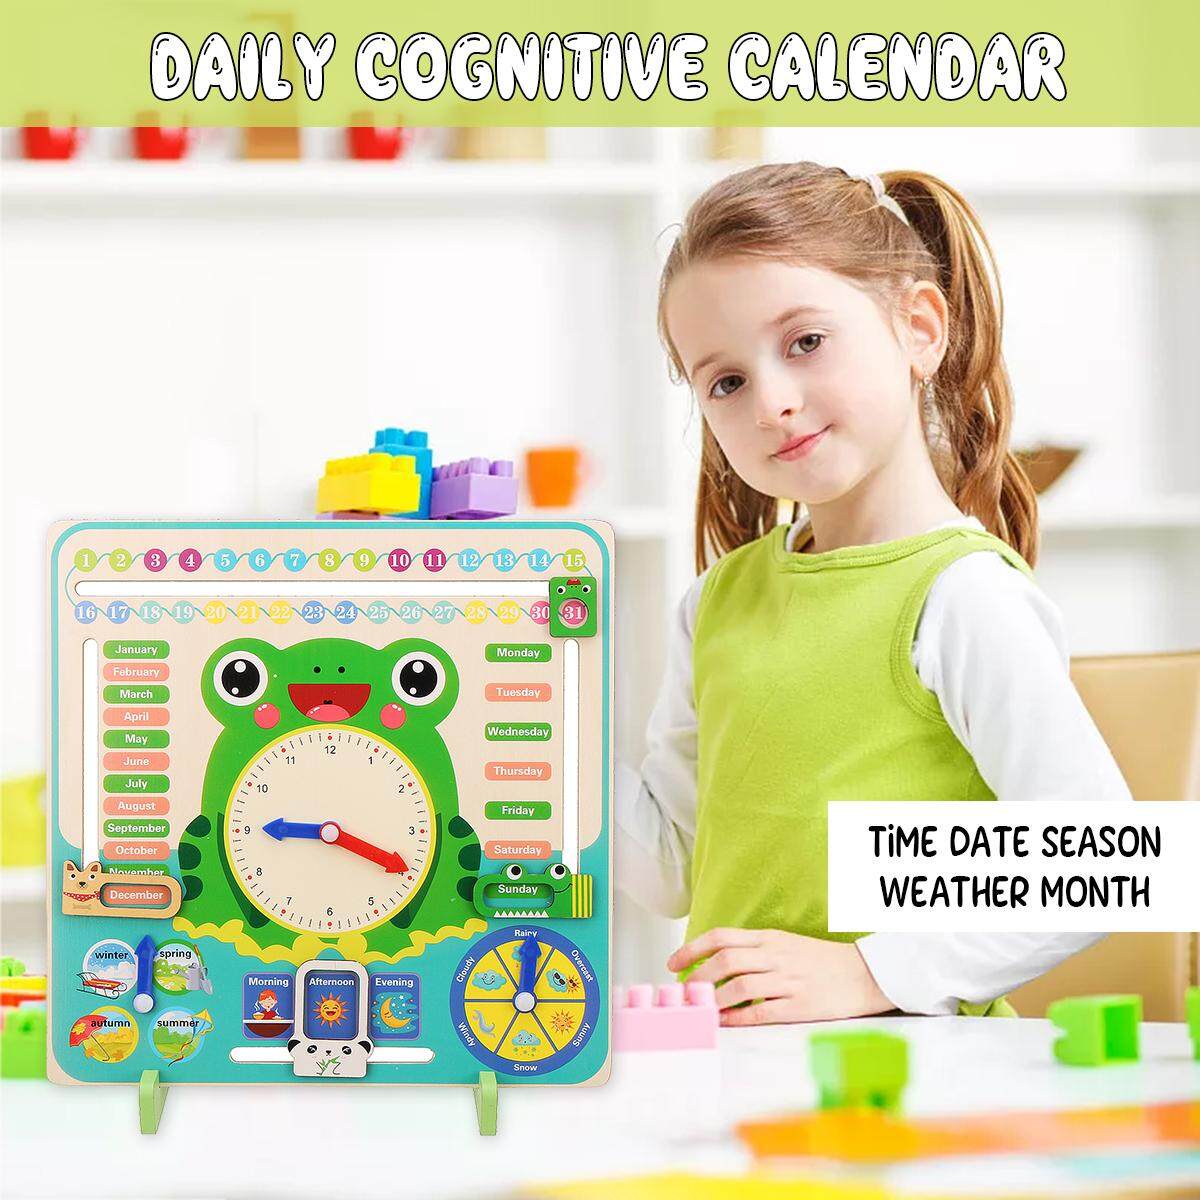 Baby Early Educational Multifunctional Wooden Clock Toy Time Date Season Weather for Kids Children Wooden Clock Toy